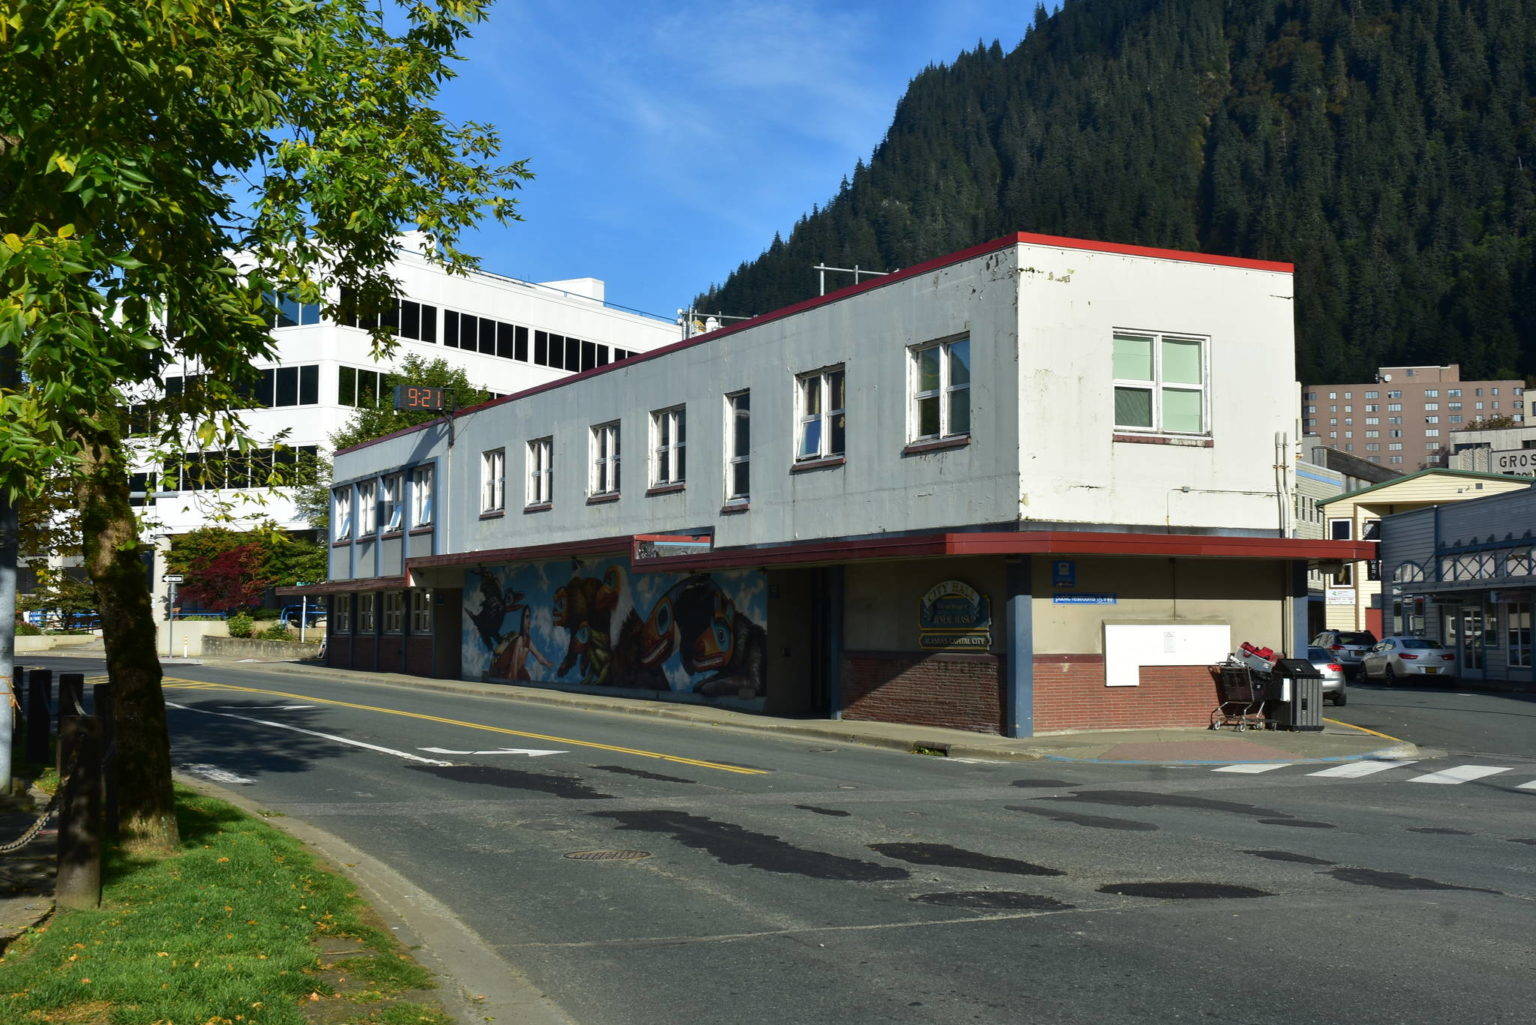 Juneau City Hall. On Thursday night, assembly members voted to add money to the Household and Individual Assistance programs and make the eligibility requirements more restrictive. (Peter Segall / Juneau Empire File)